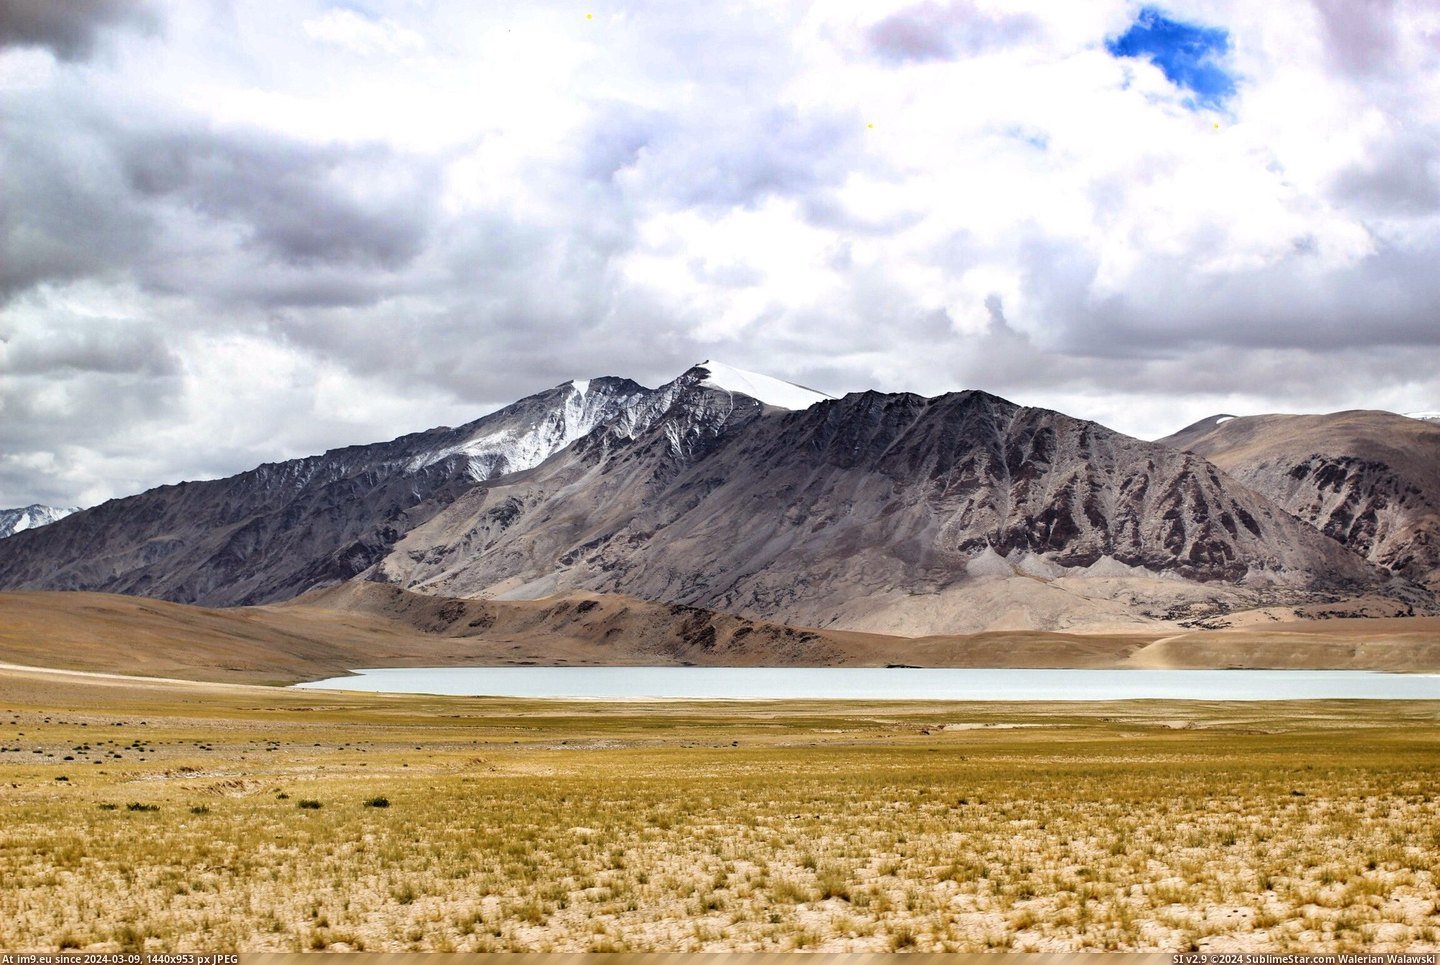 #Mountains #India #2304x1536 #D1andonly #Leh #Incredibleindia [Earthporn] The mountains in Leh, India [2304x1536][IncredibleIndia] by -u-d1andonly Pic. (Image of album My r/EARTHPORN favs))